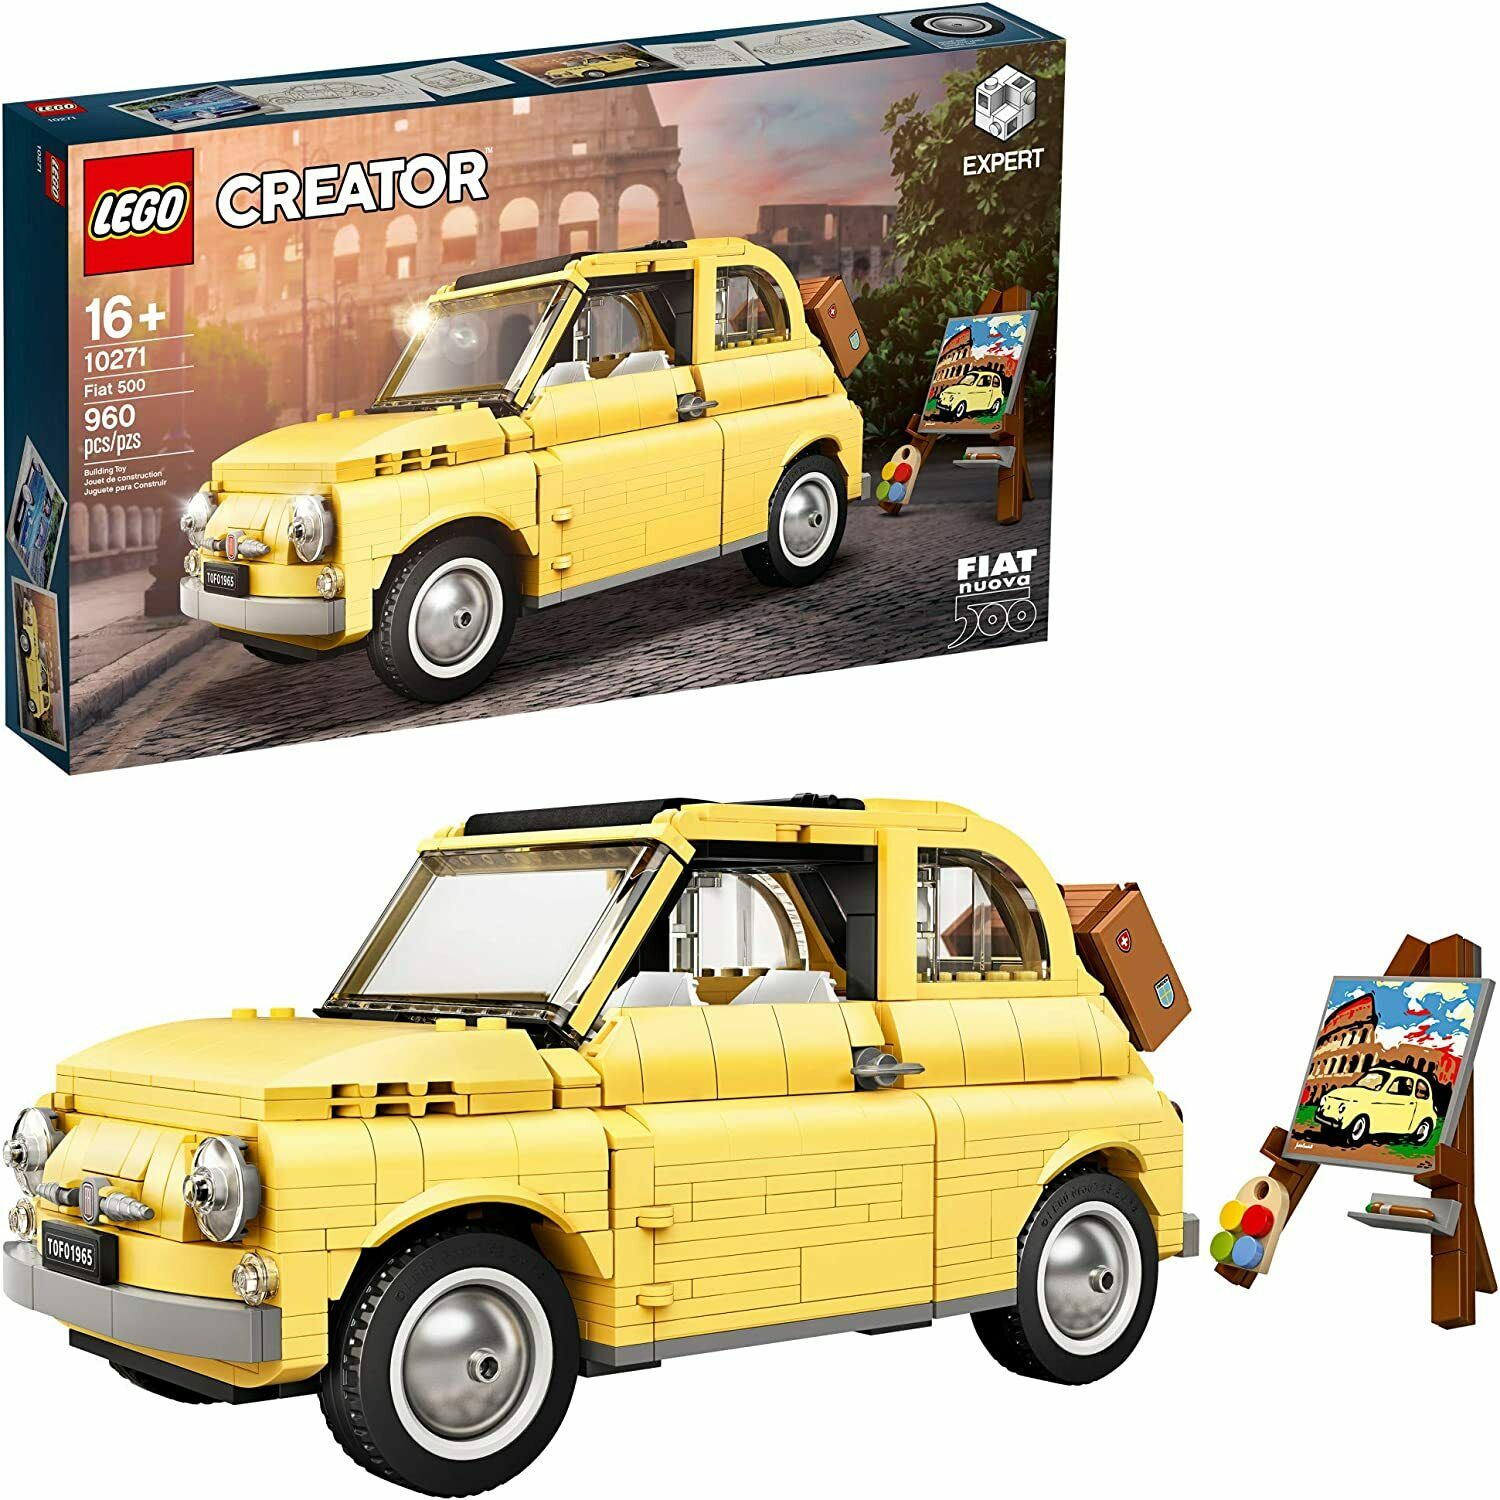 *NEW* LEGO Creator: Fiat 500 10271 | Brand New in Box | Hard to Find | In Stock!